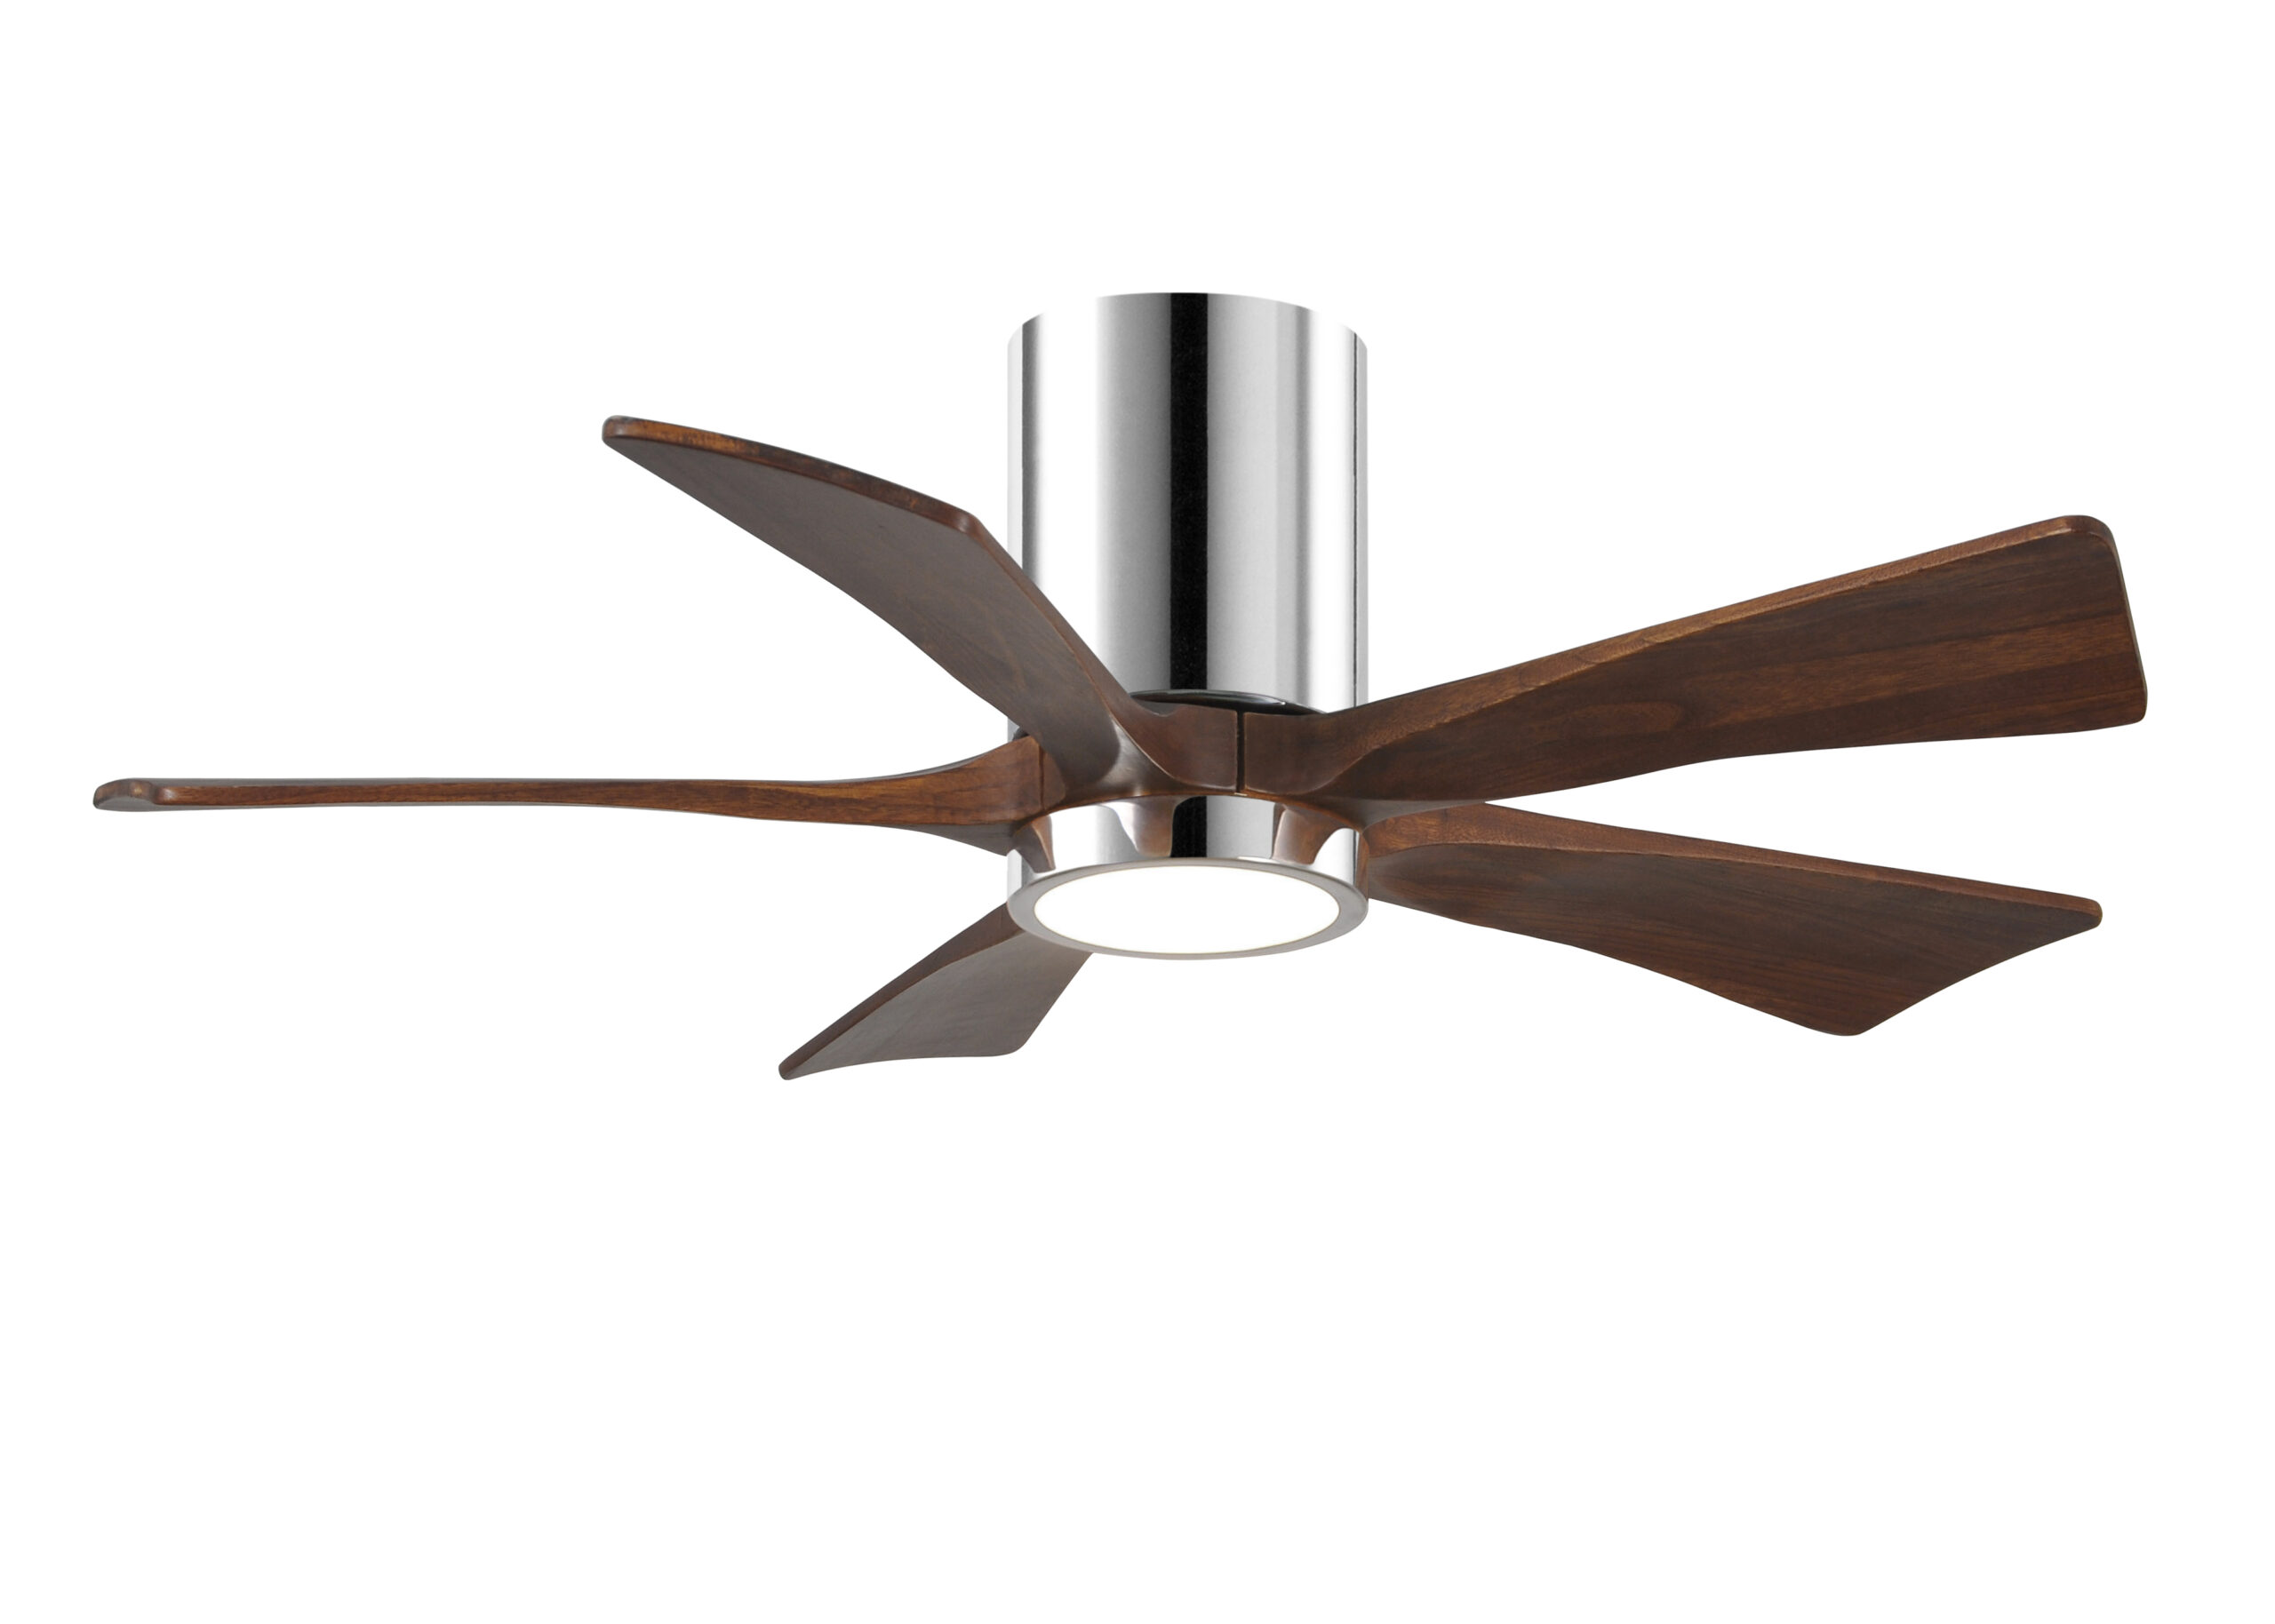 Irene-5HLK Ceiling Fan in Polished Chrome Finish with 42